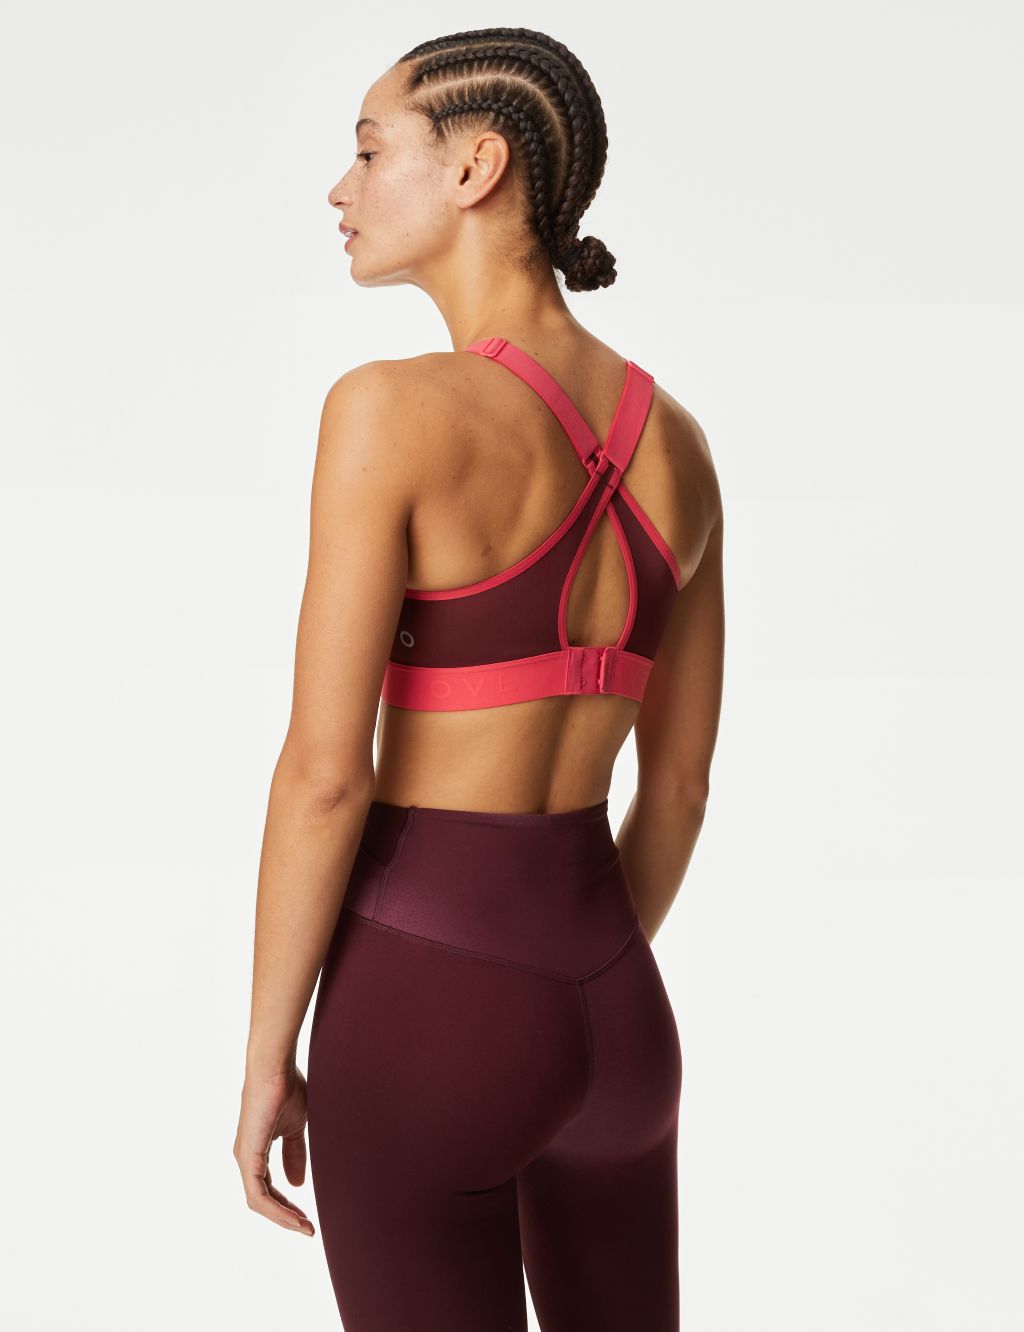 Freedom To Move Ultimate Support Sports Bra A-E image 5